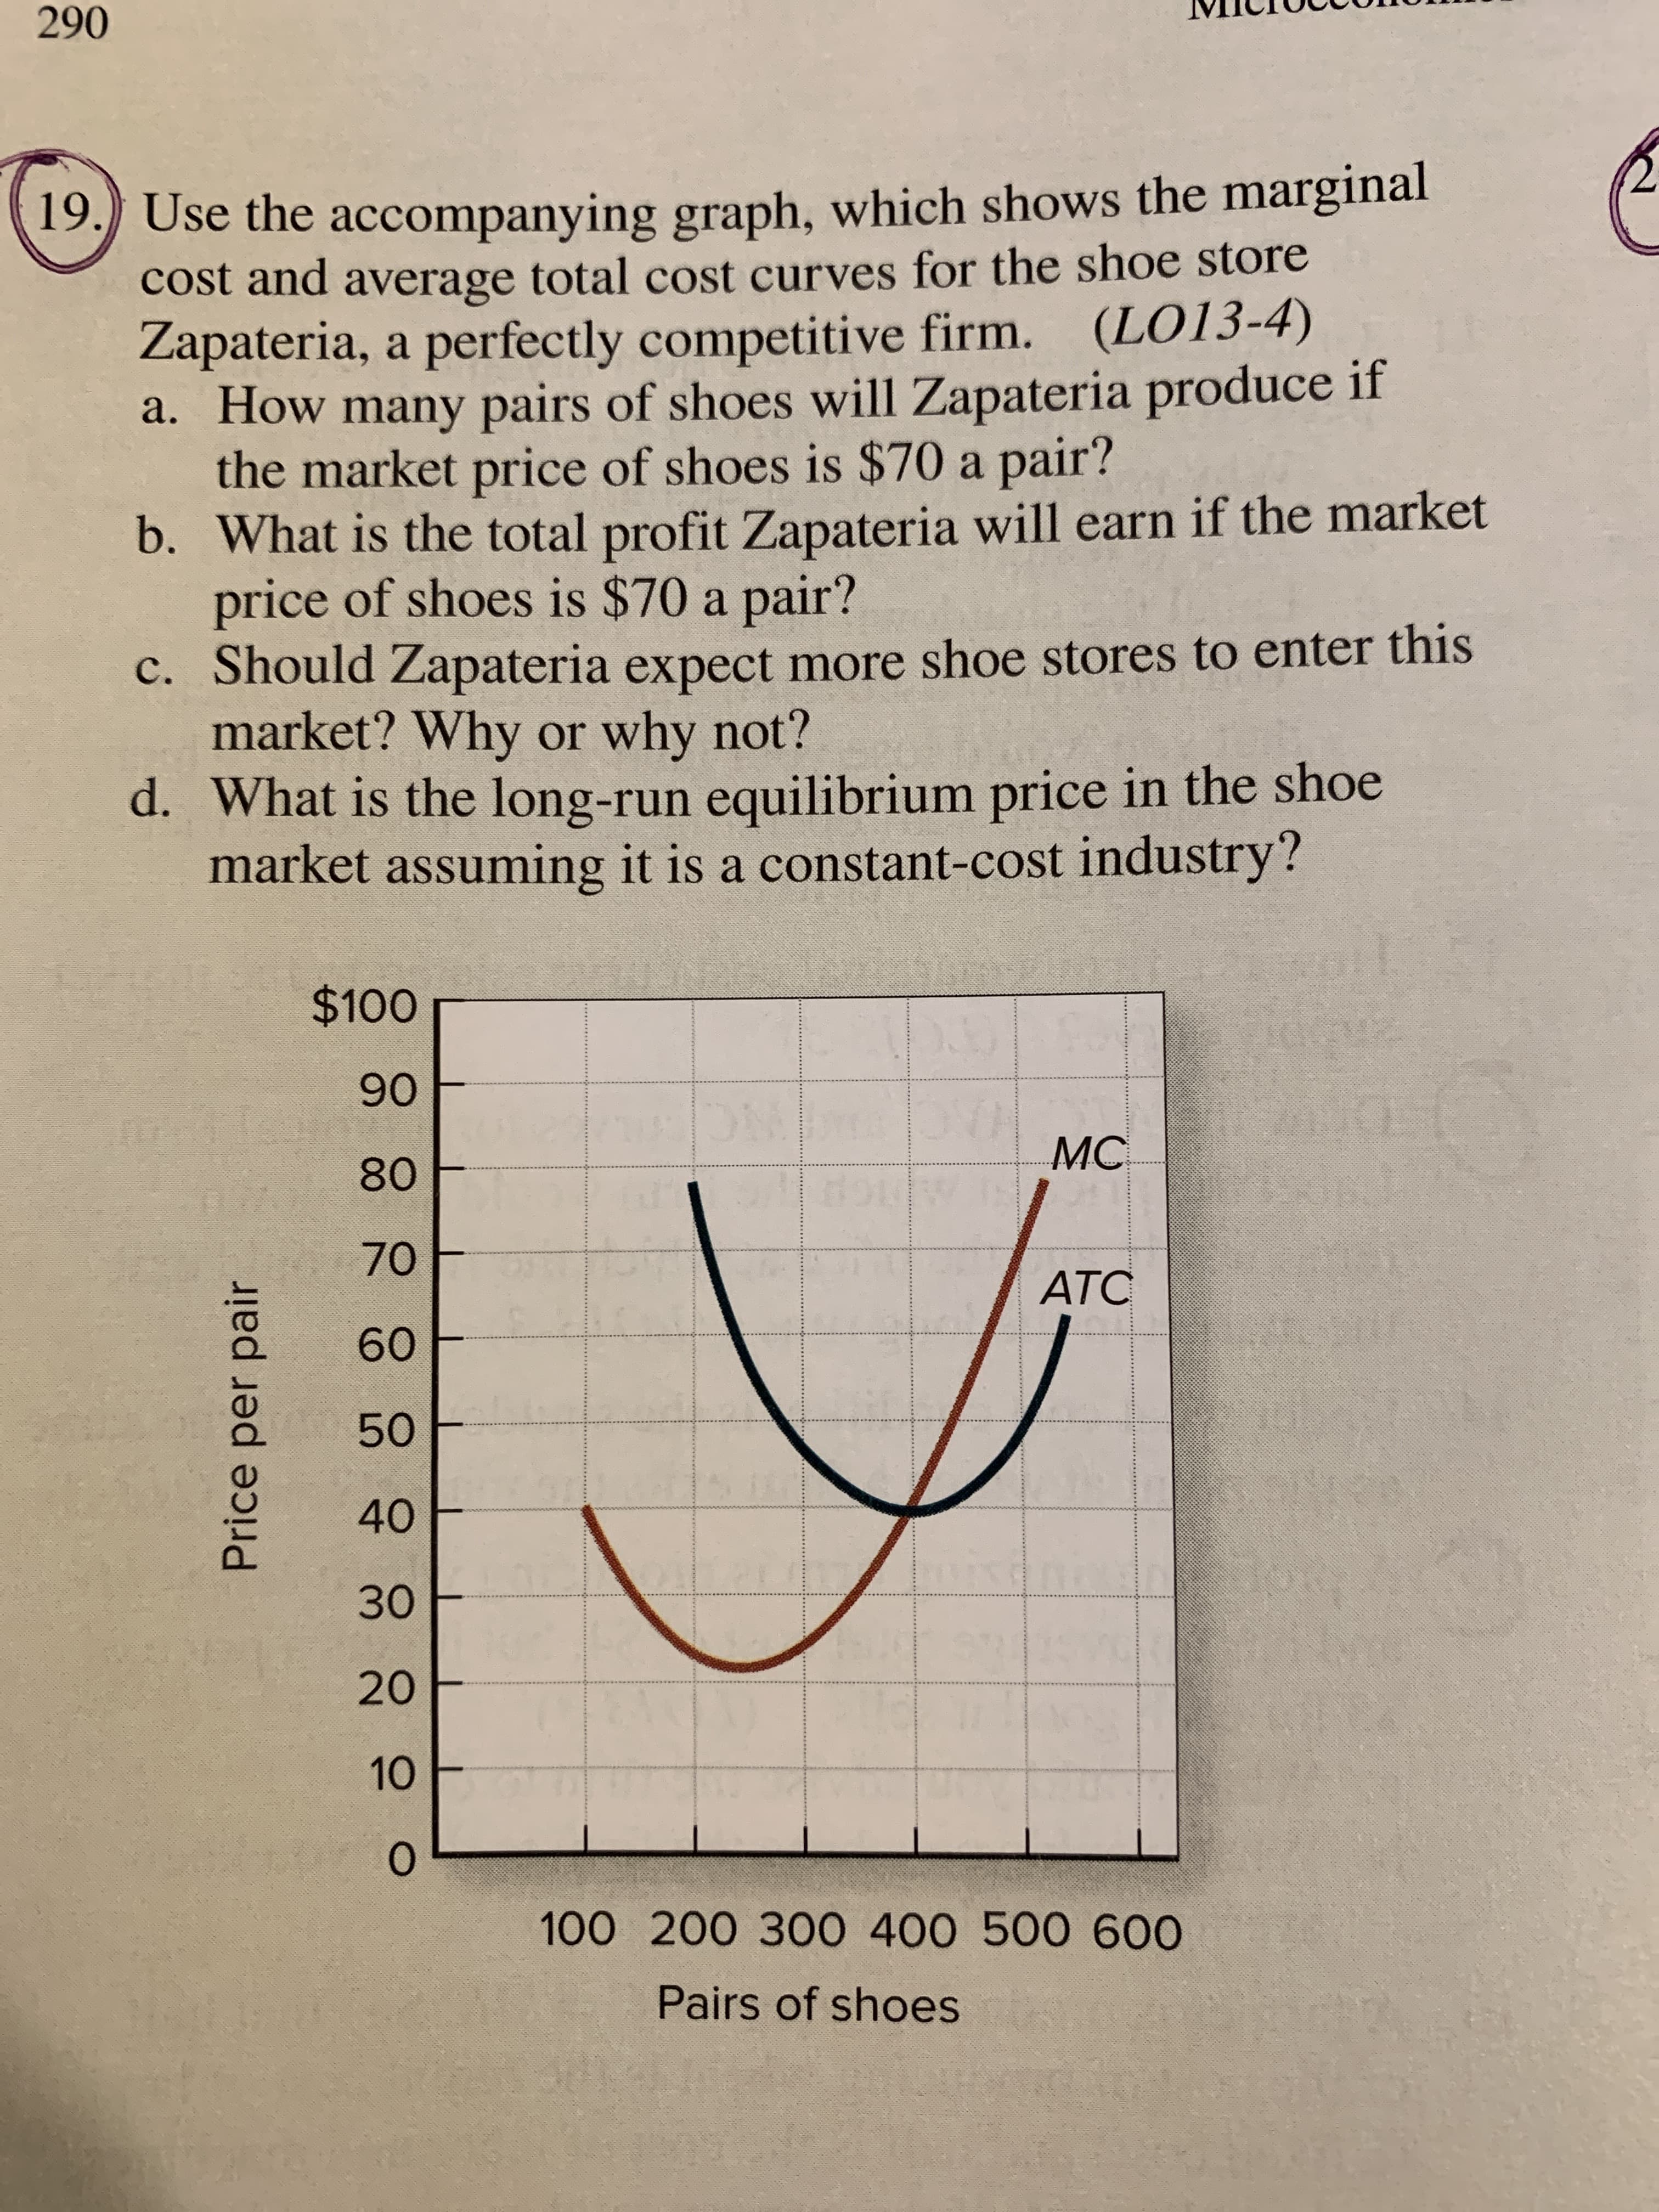 Price per pair
19. Use the accompanying graph, which shows the marginal
cost and average total cost curves for the shoe store
Zapateria, a perfectly competitive firm. (LO13-4)
a. How many pairs of shoes will Zapateria produce if
the market price of shoes is $70 a pair?
b. What is the total profit Zapateria will earn if the market
price of shoes is $70 a pair?
c. Should Zapateria expect more shoe stores to enter this
market? Why or why not?
d. What is the long-run equilibrium price in the shoe
market assuming it is a constant-cost industry?
06
MC
NC
08
70
ATC
09
40
30
2.
10
100 200 300 400 500 600
Pairs of shoes
